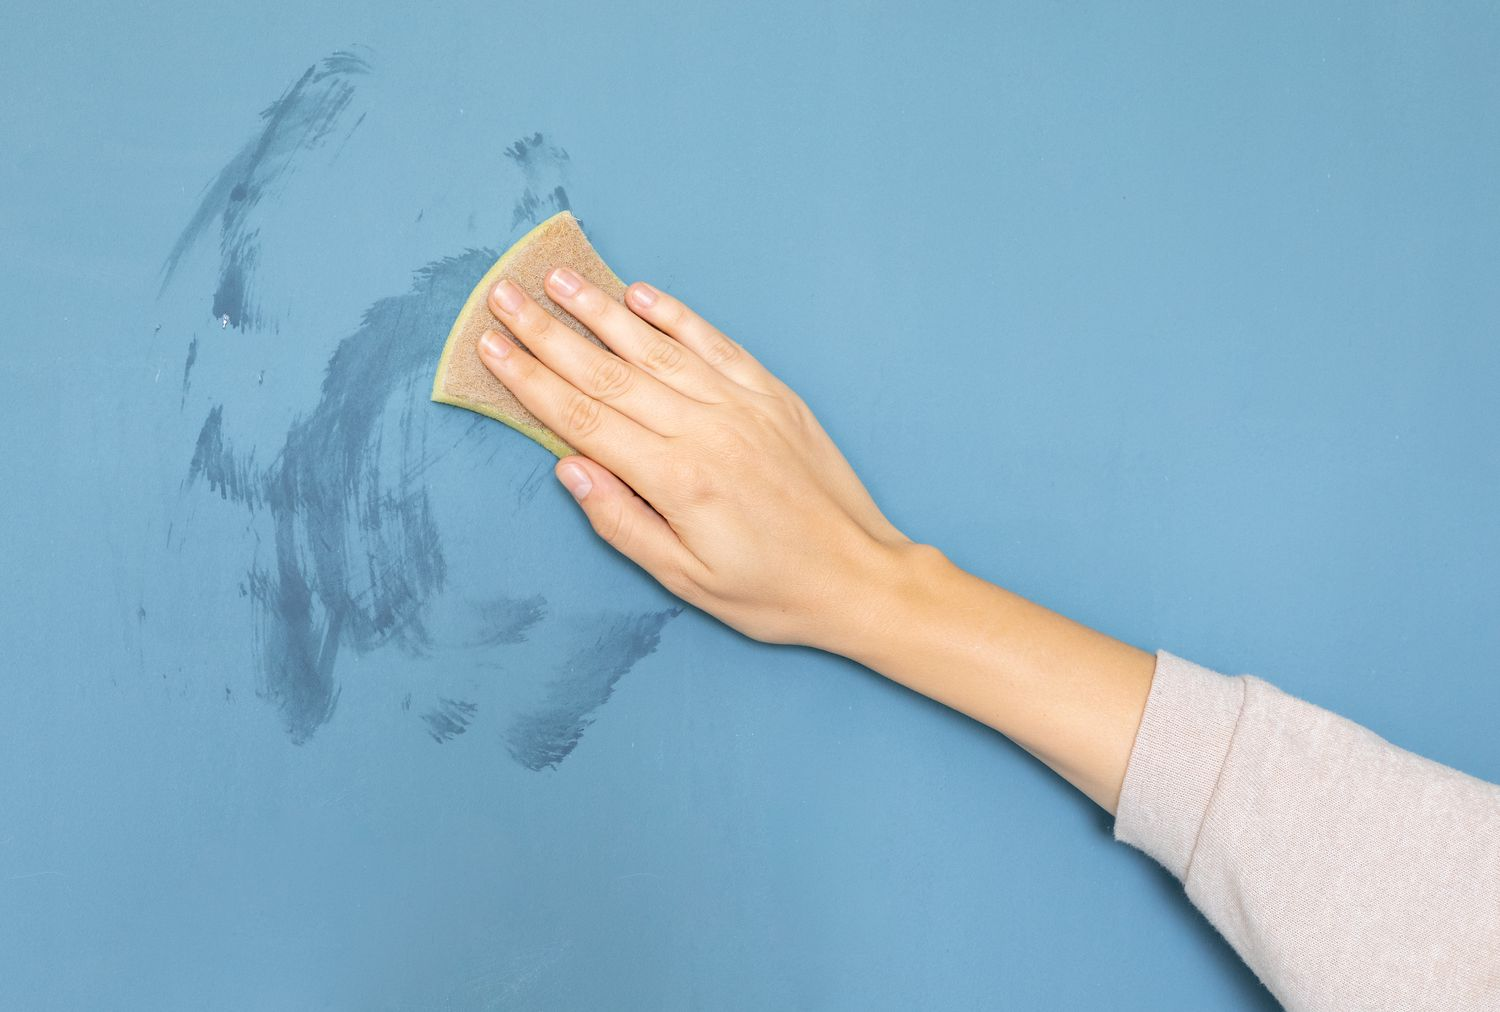 Make a cleaning solution using liquid dish soap and white vinegar with warm water to clean painted walls